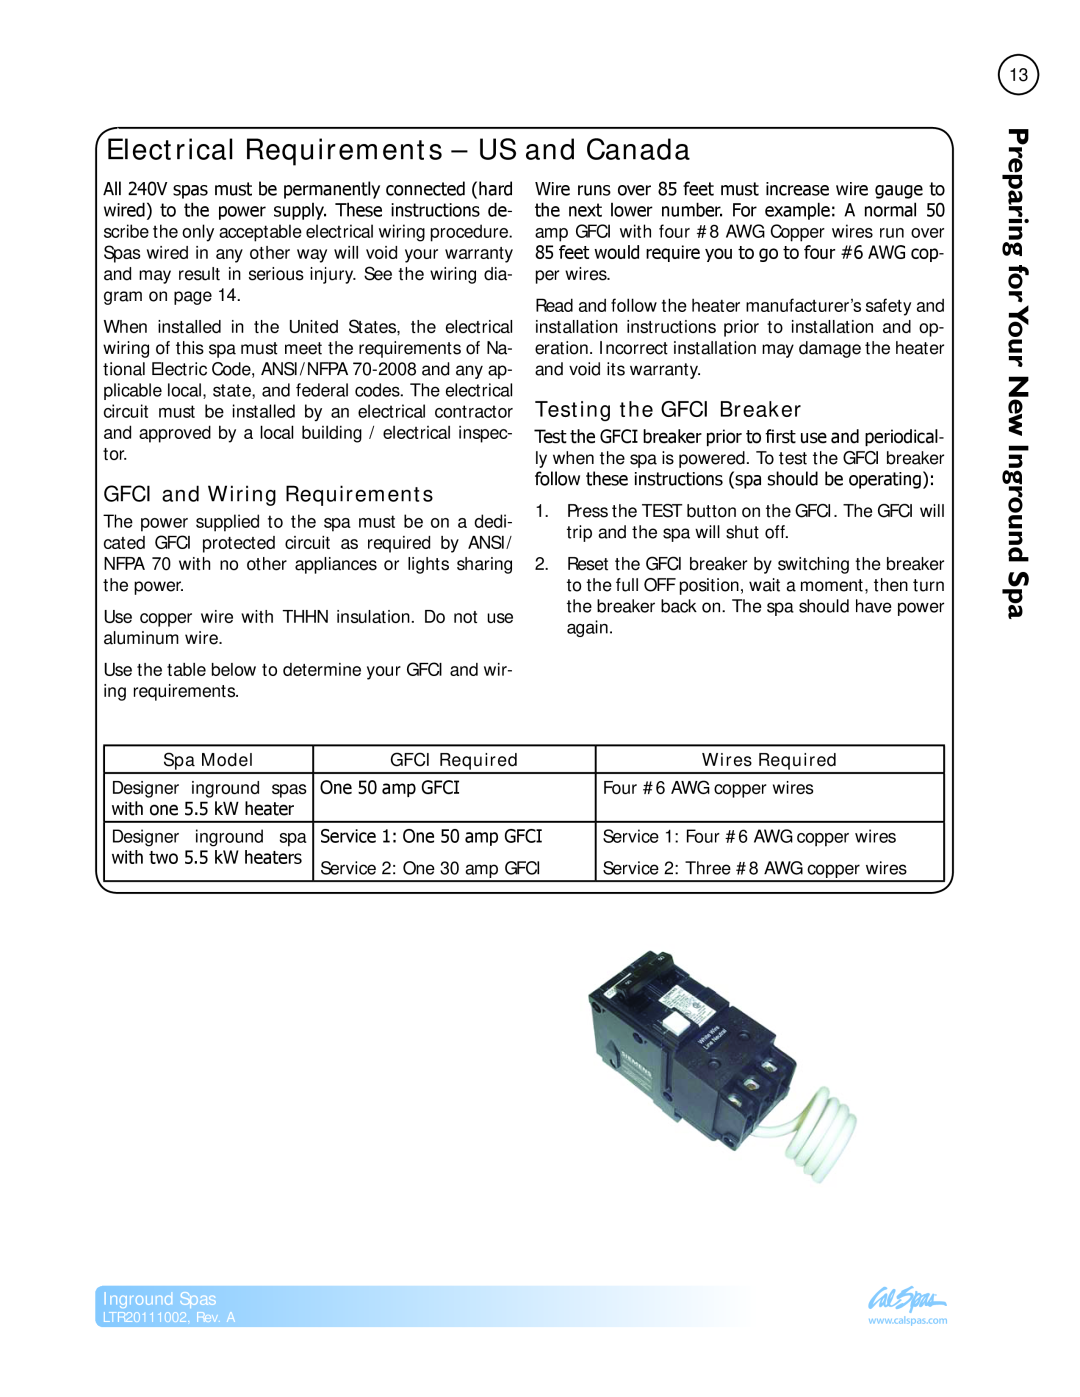 Cal Spas LTR20111002 manual Electrical Requirements - US and Canada, GFCI and Wiring Requirements, Testing the GFCI Breaker 